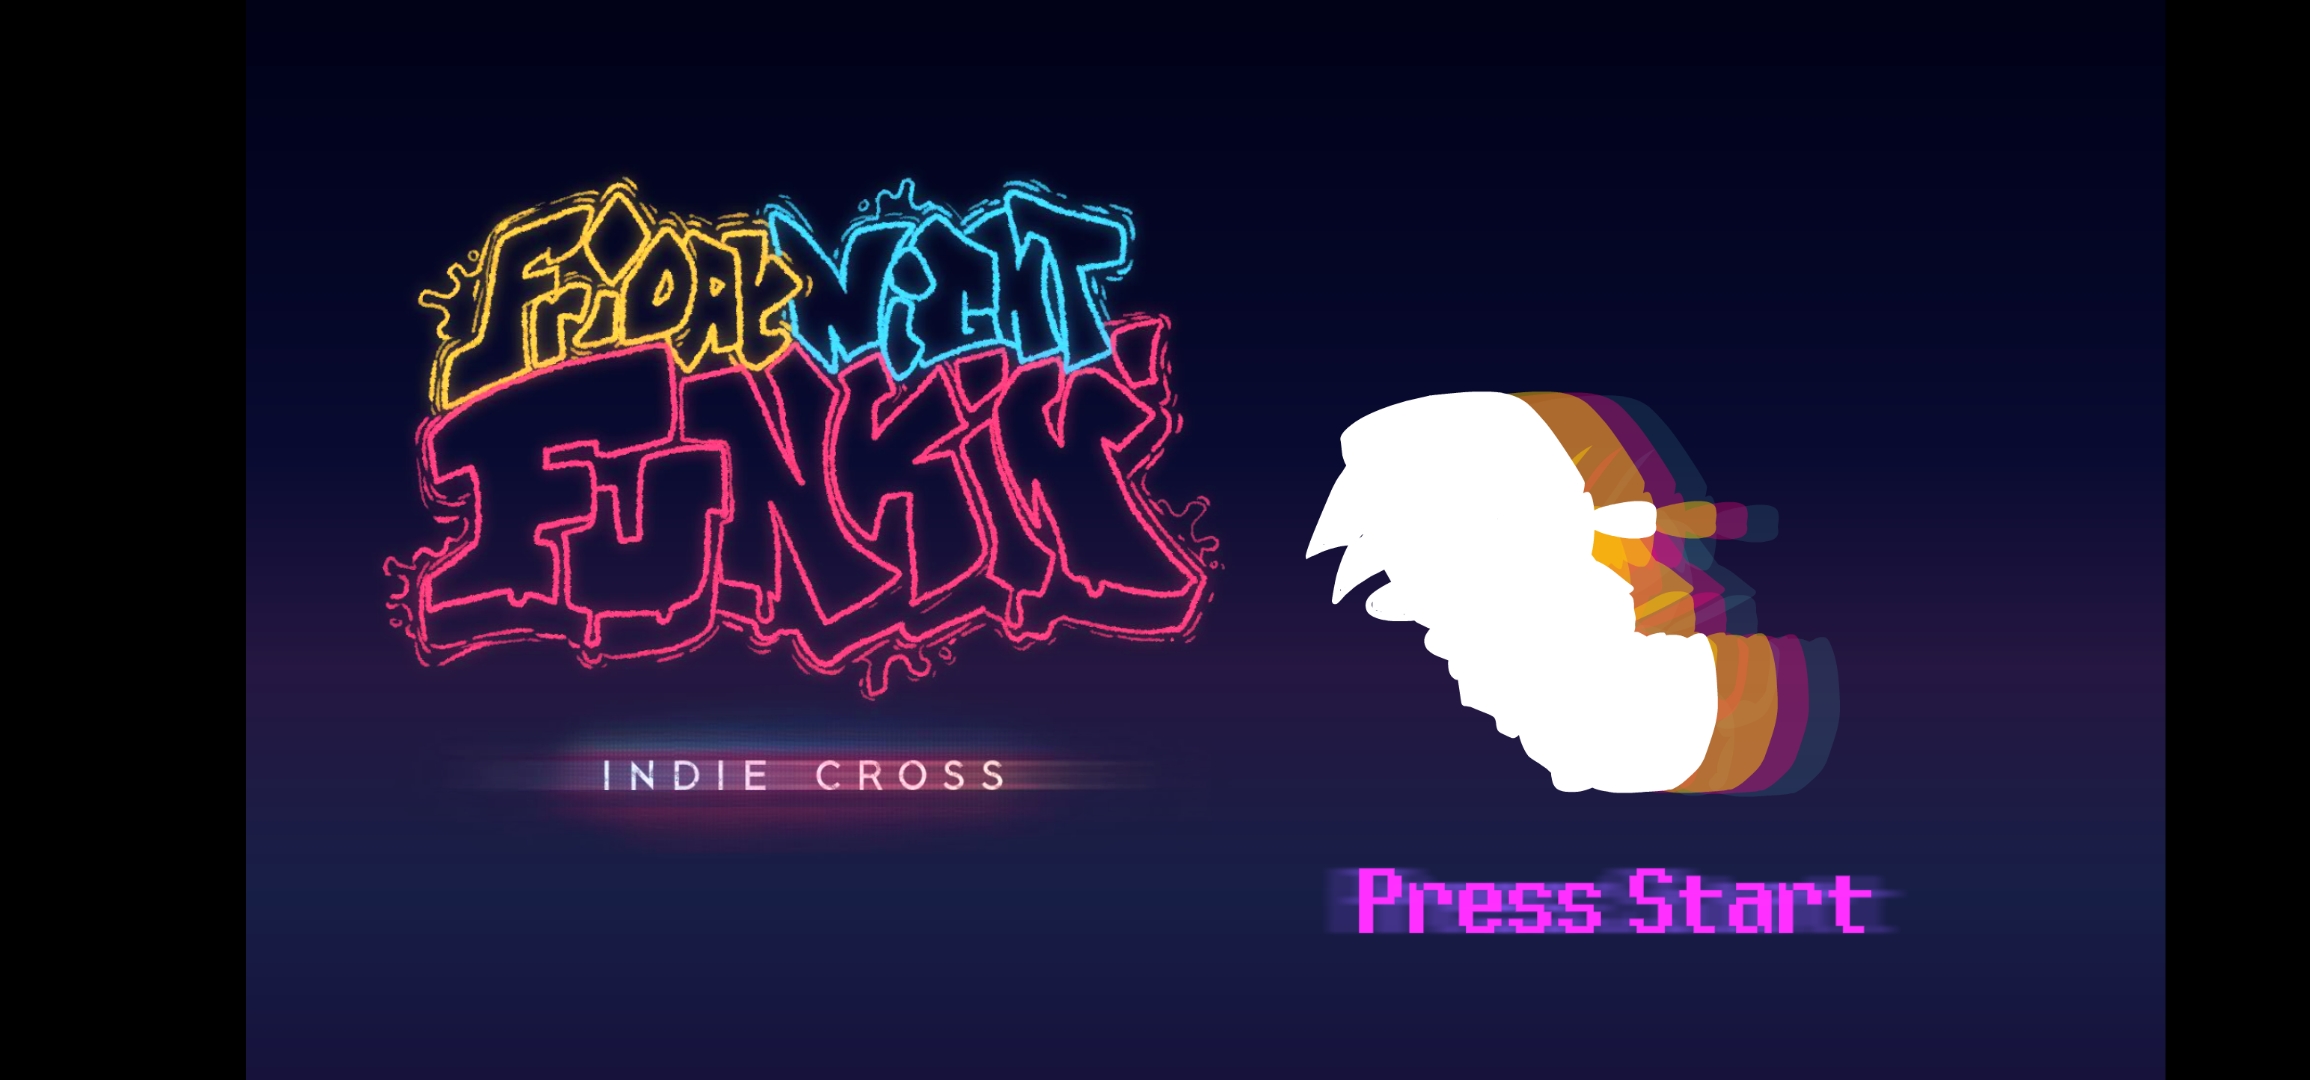 FNF:ANDROID:INDIE CROSS [Friday Night Funkin'] [Mods]